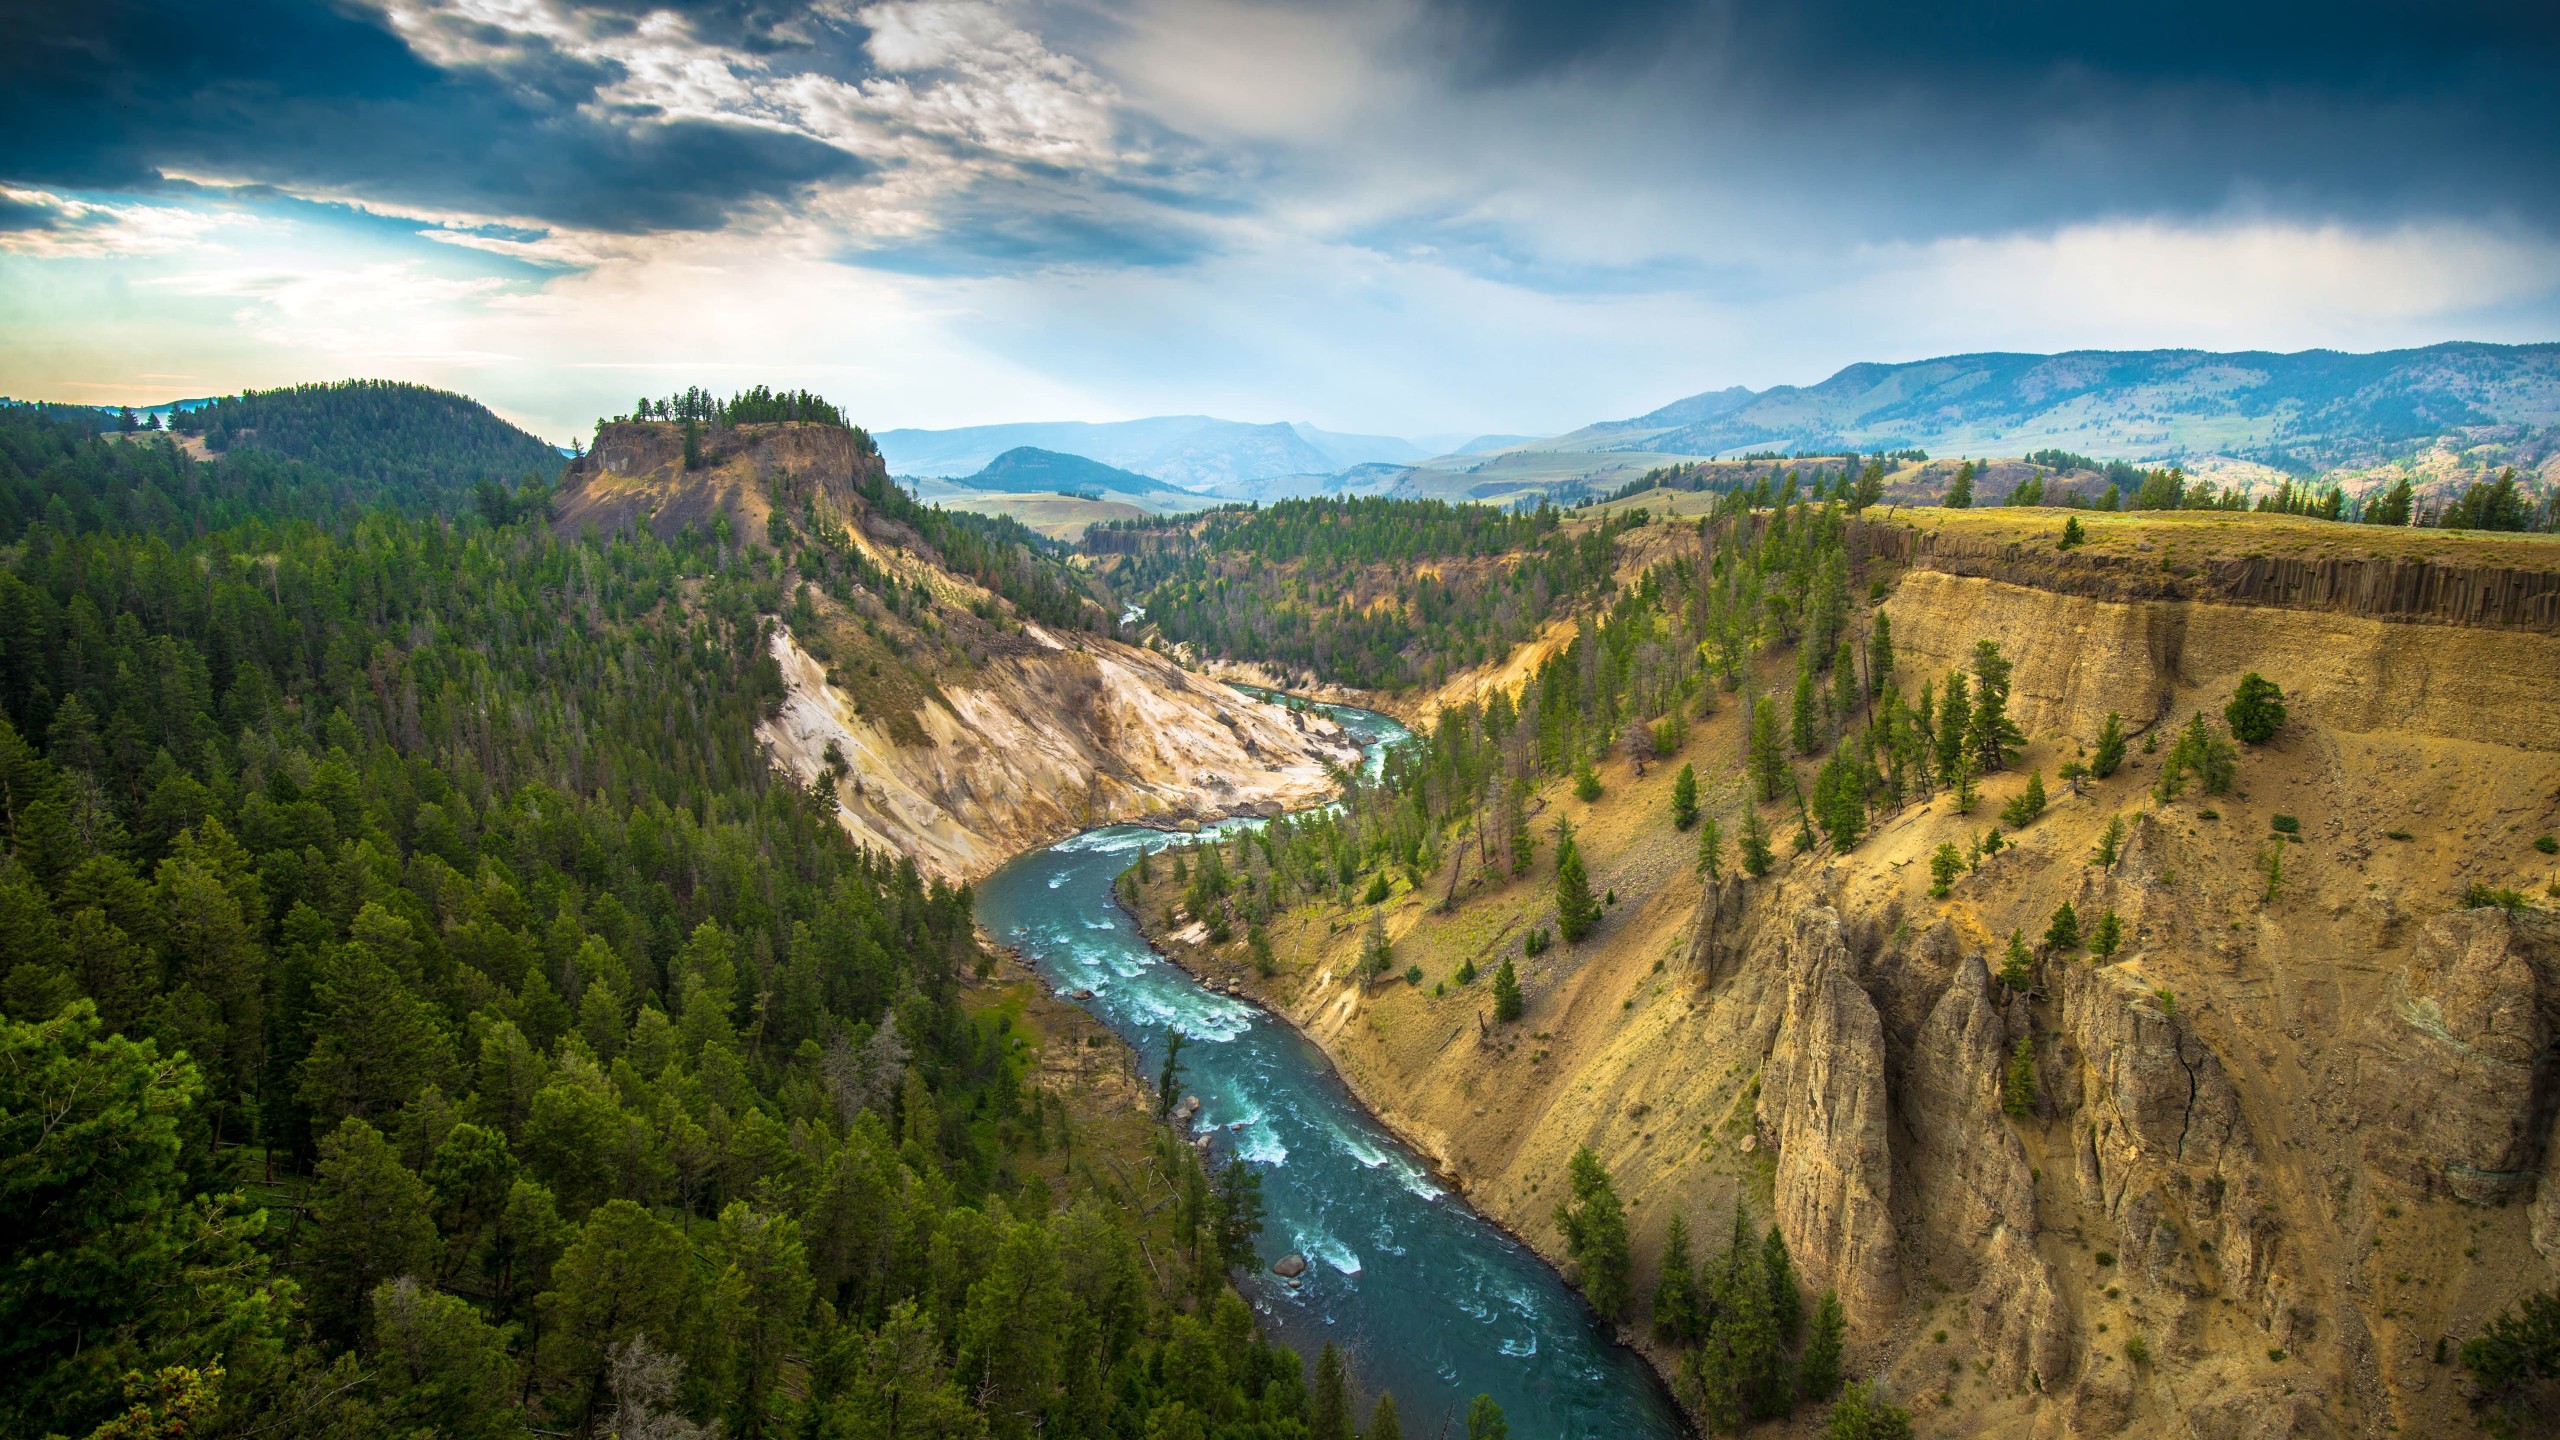 The River, Grand Canyon of Yellowstone National Park, USA Wallpaper for Social Media YouTube Channel Art